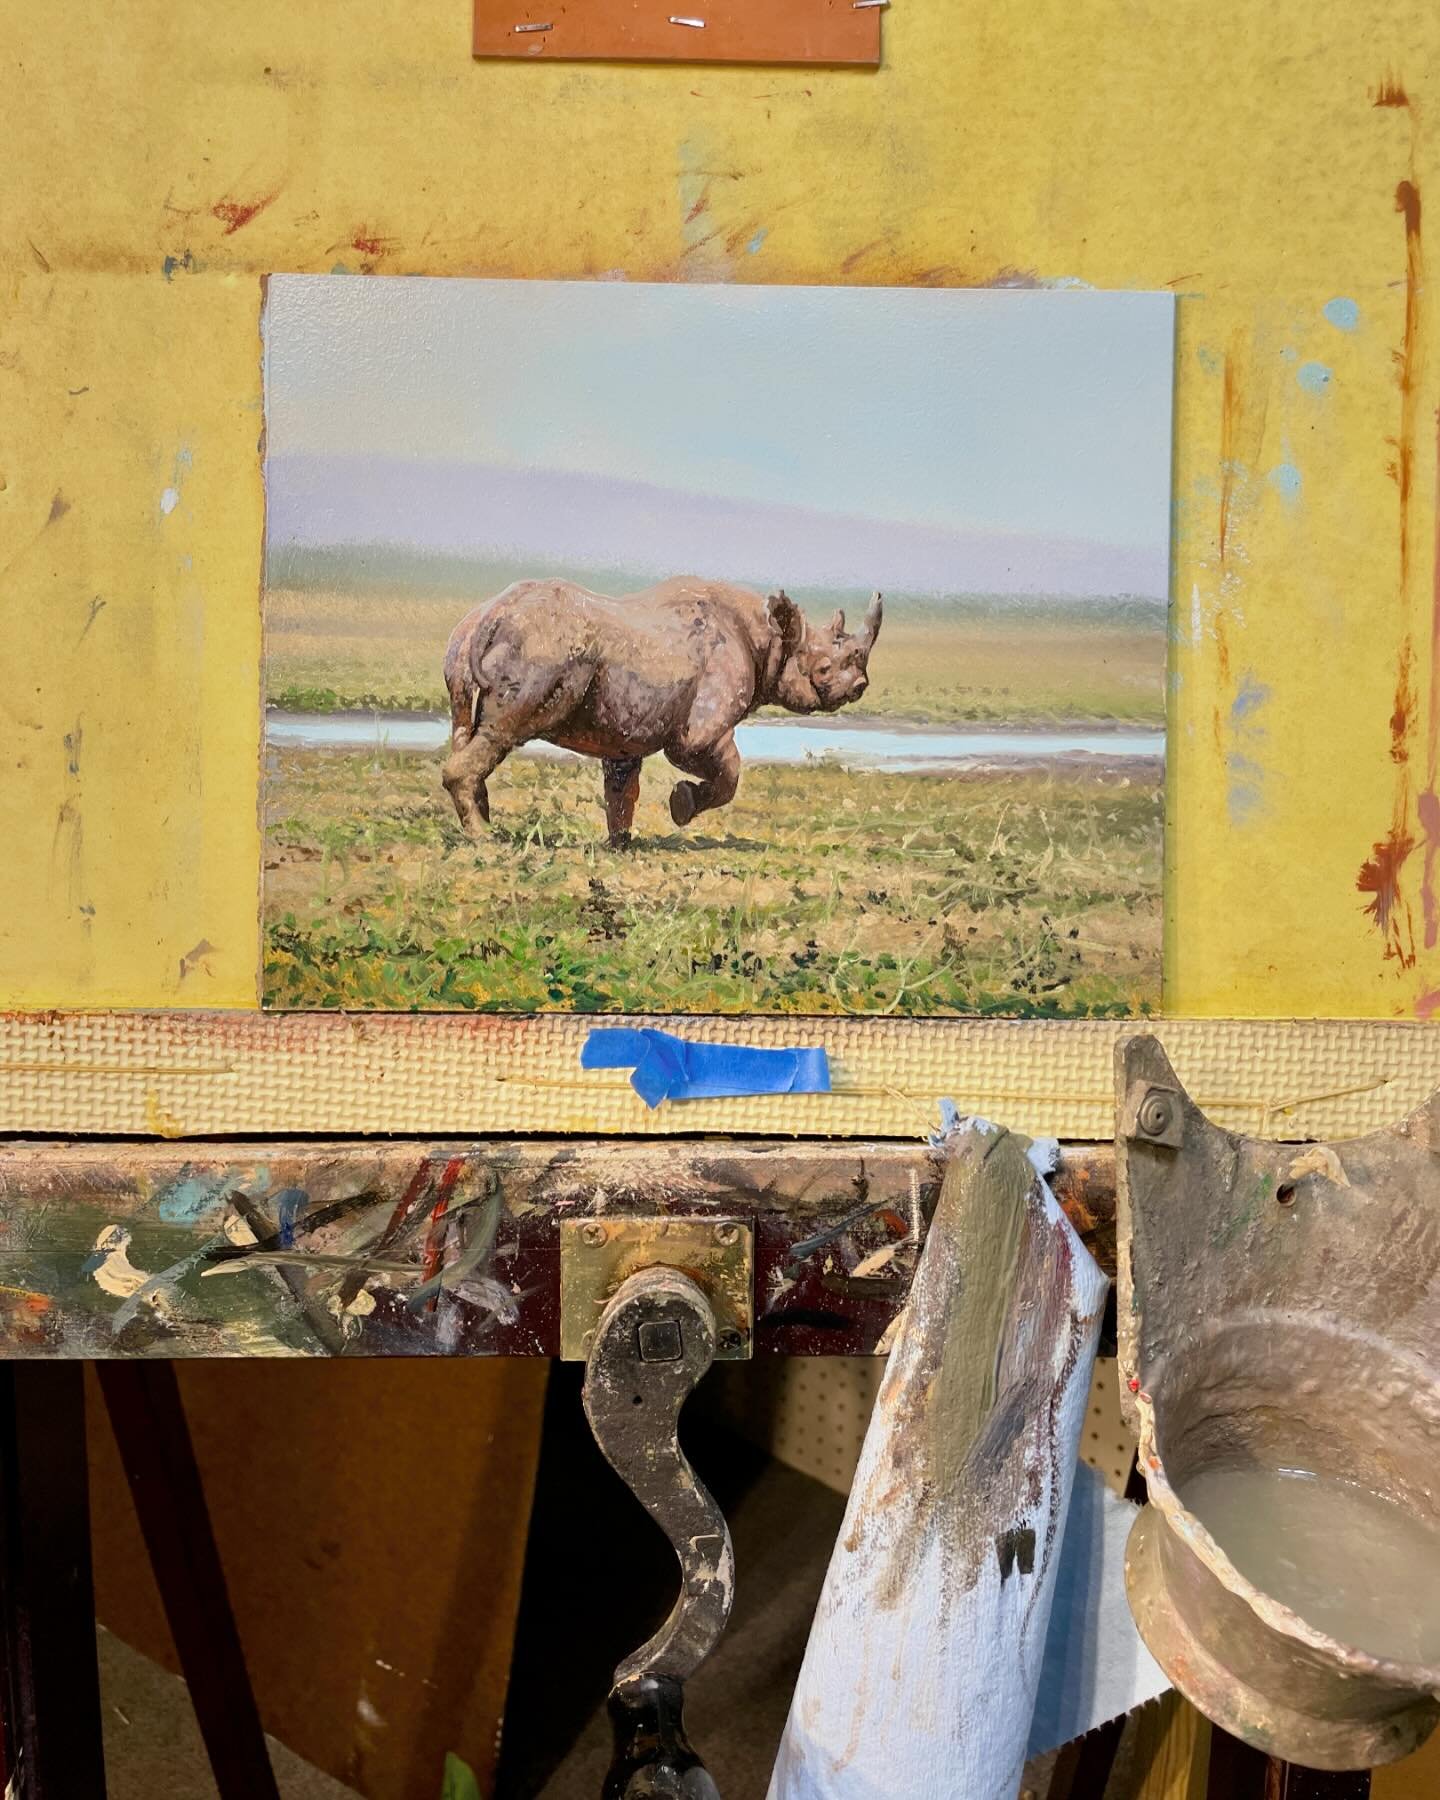 Monday studio vibes. Making some progress on this black rhino on board&nbsp; it is slowly coming to life on a tiny oil panel. Loving the texture these well-loved brushes create. 
#artonMondays #oilpainting #blackrhinoart #artistsofwildlife&nbsp; #cra